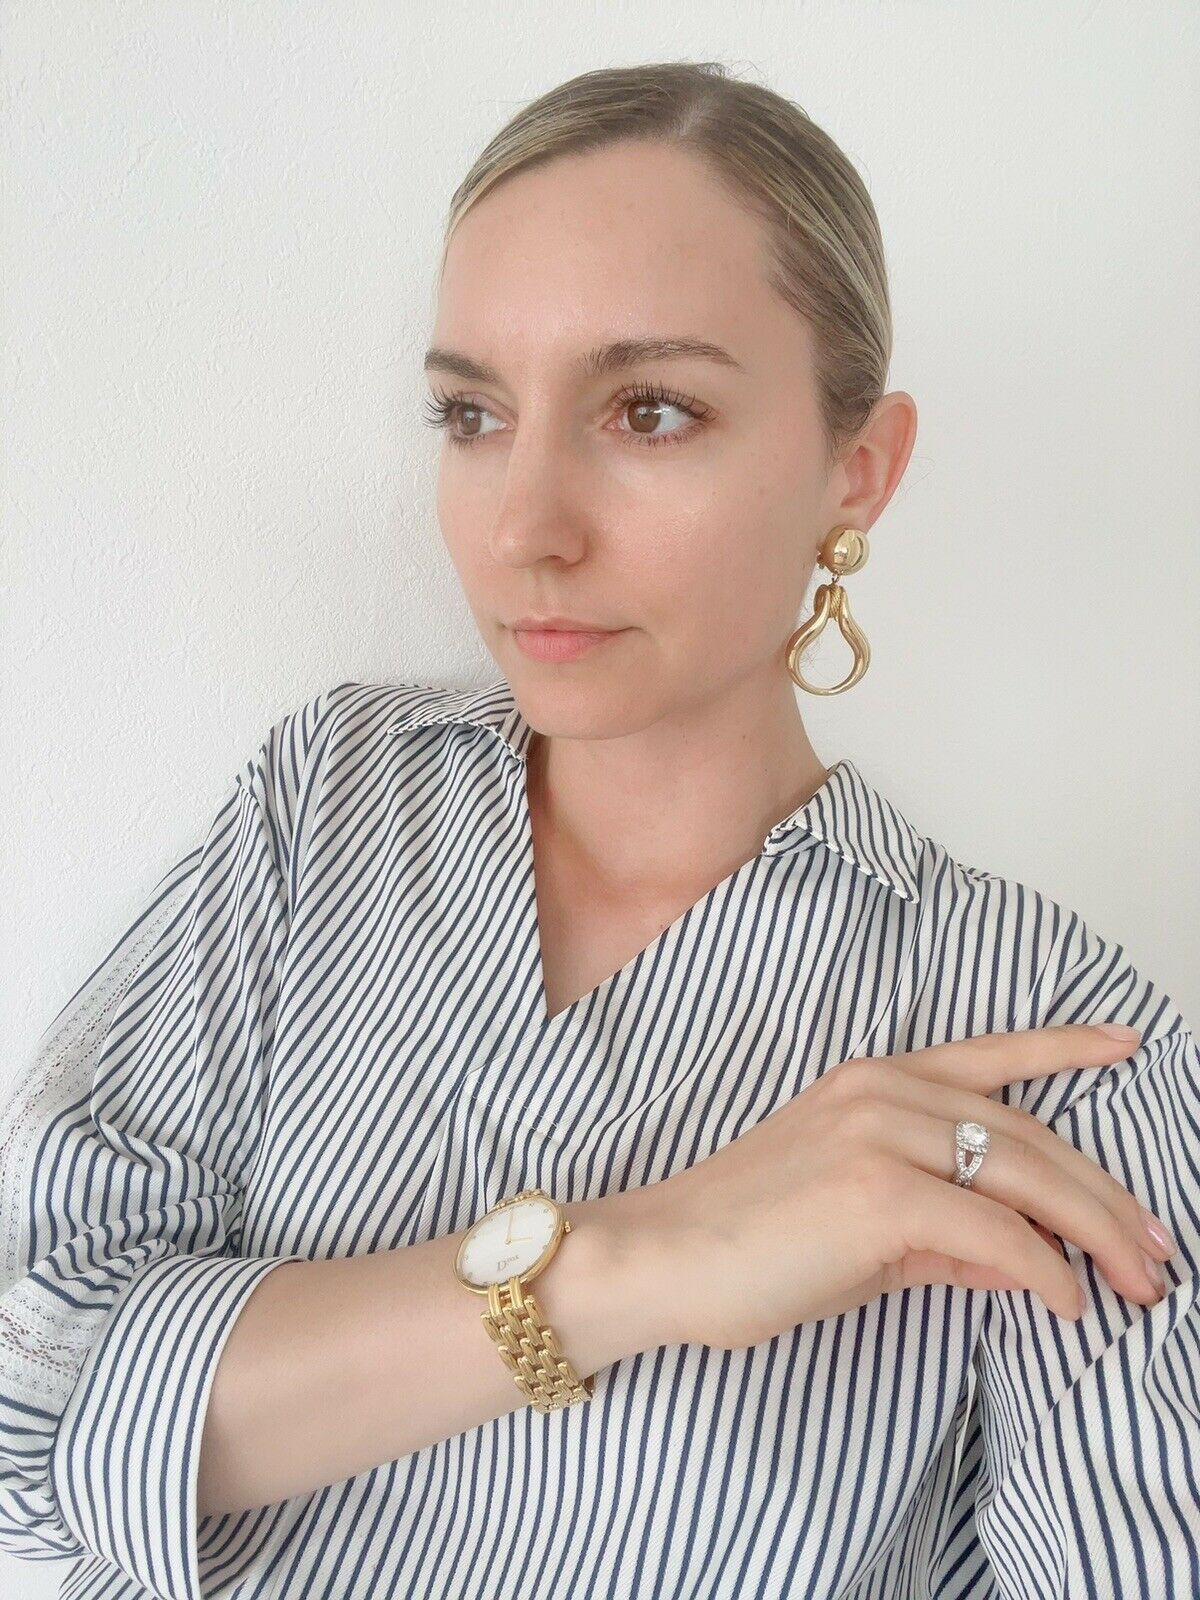 Christian Dior Germany Vintage dangle earrings Gold